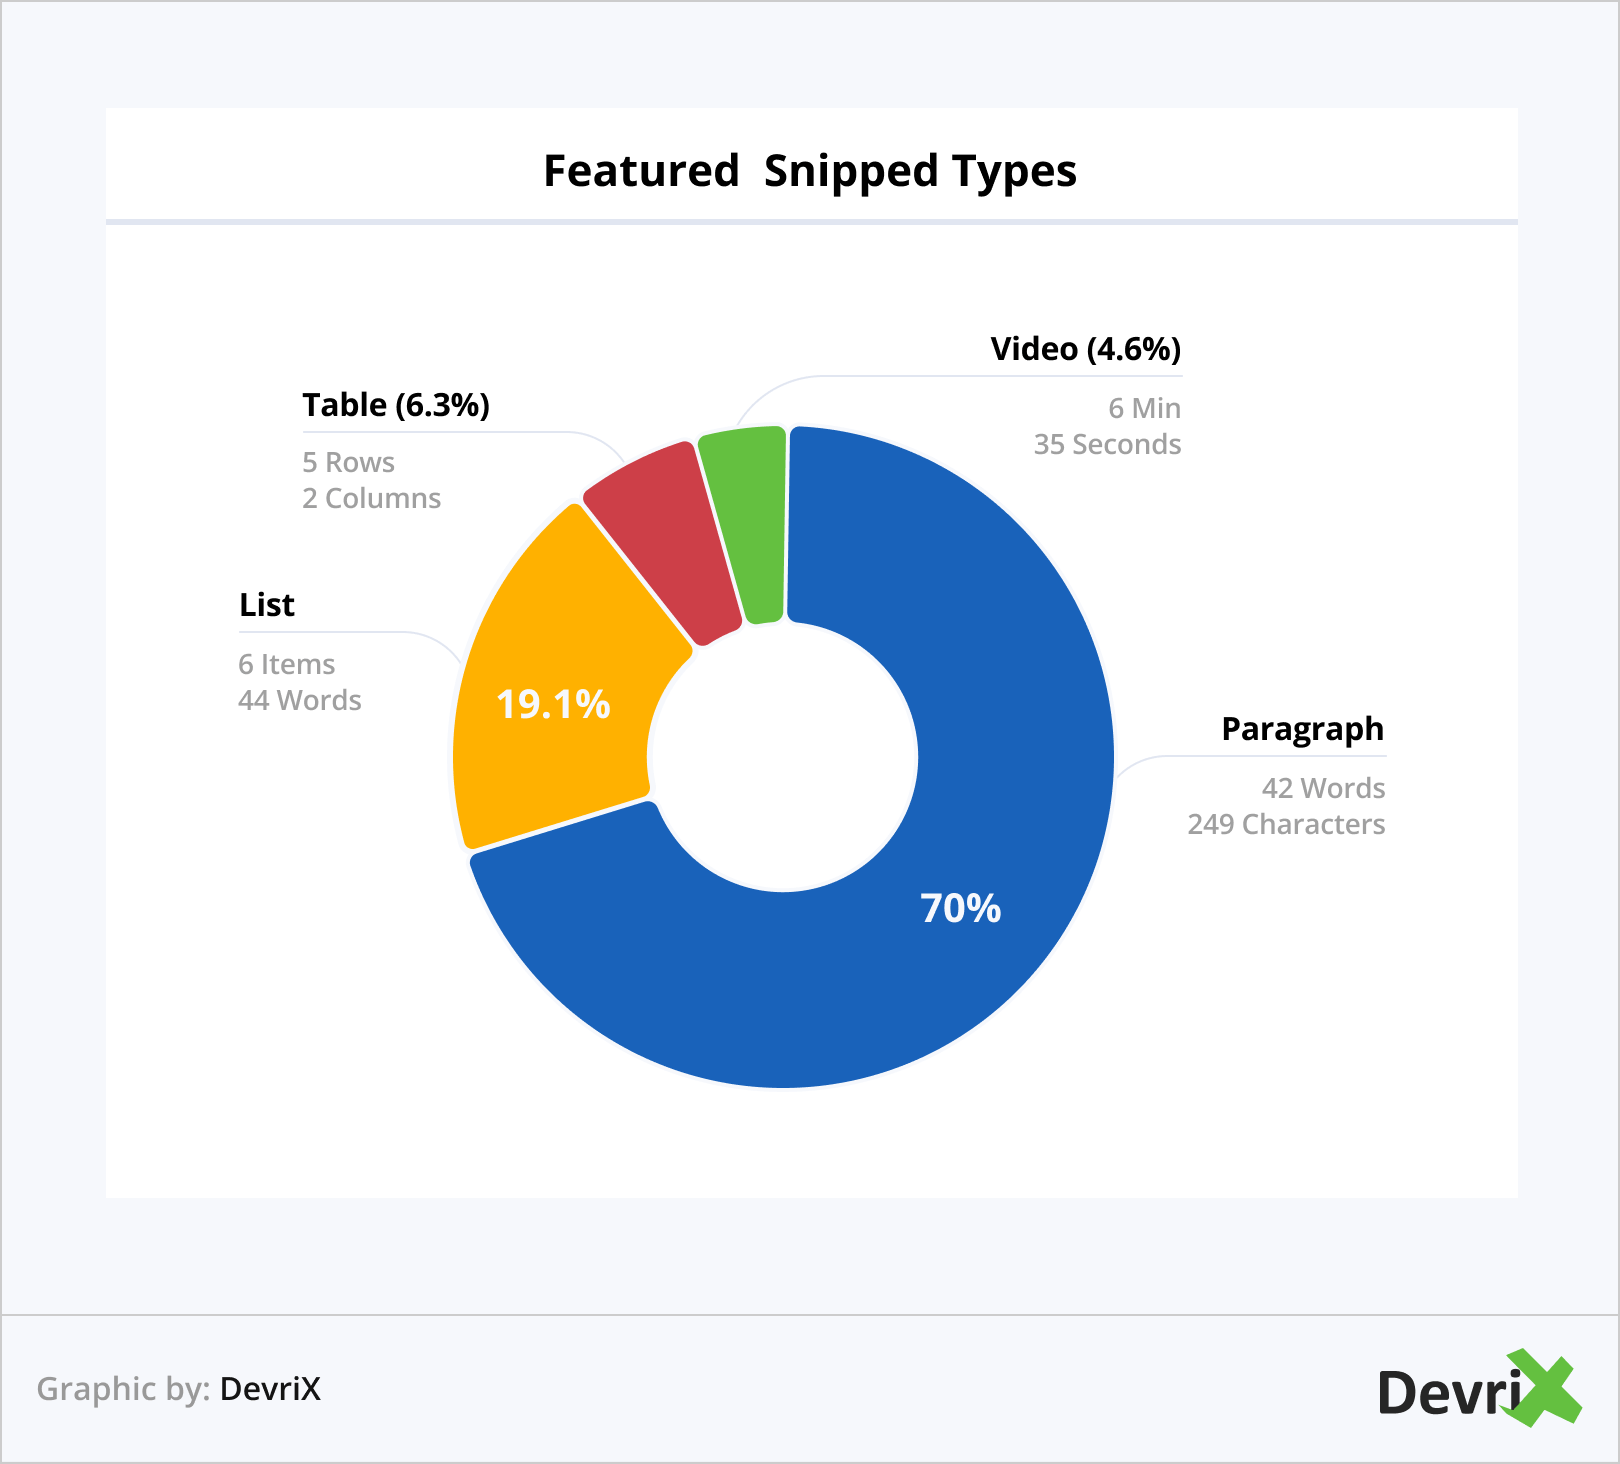 Featured Snipped Types